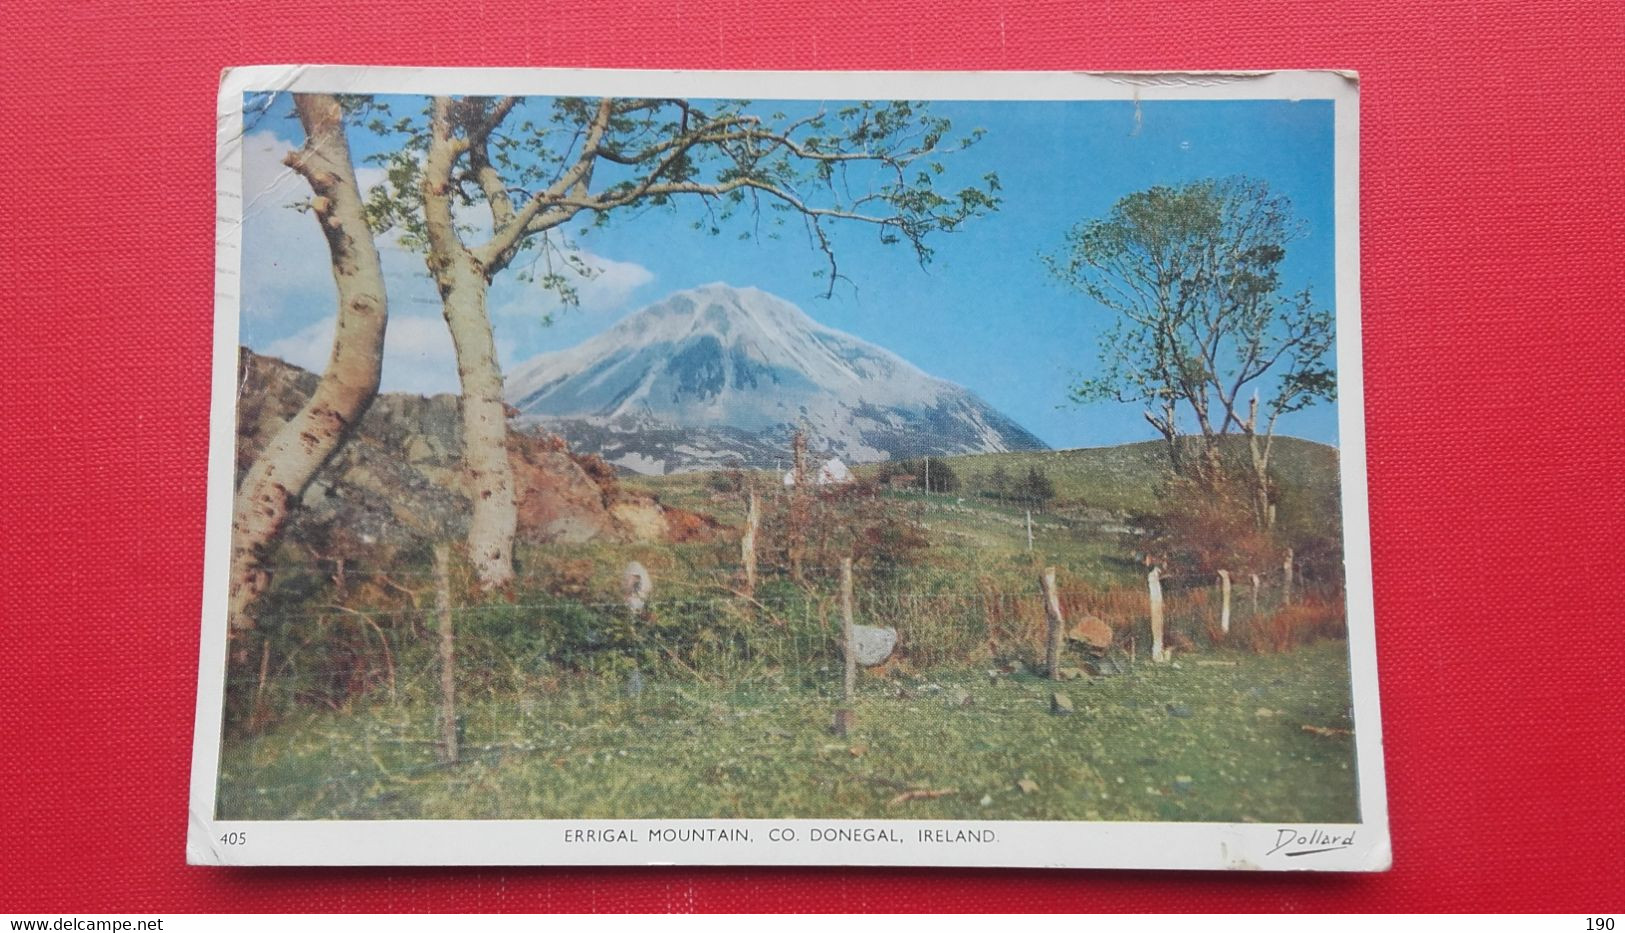 7 Postcards:PORT-NA-BLAGH,MUCKROSS HEADERRIGAL MOUNTAINDUNLEWY LOUGH,MARBLE HILL,LETTERKENNY,MULROY BAY - Donegal